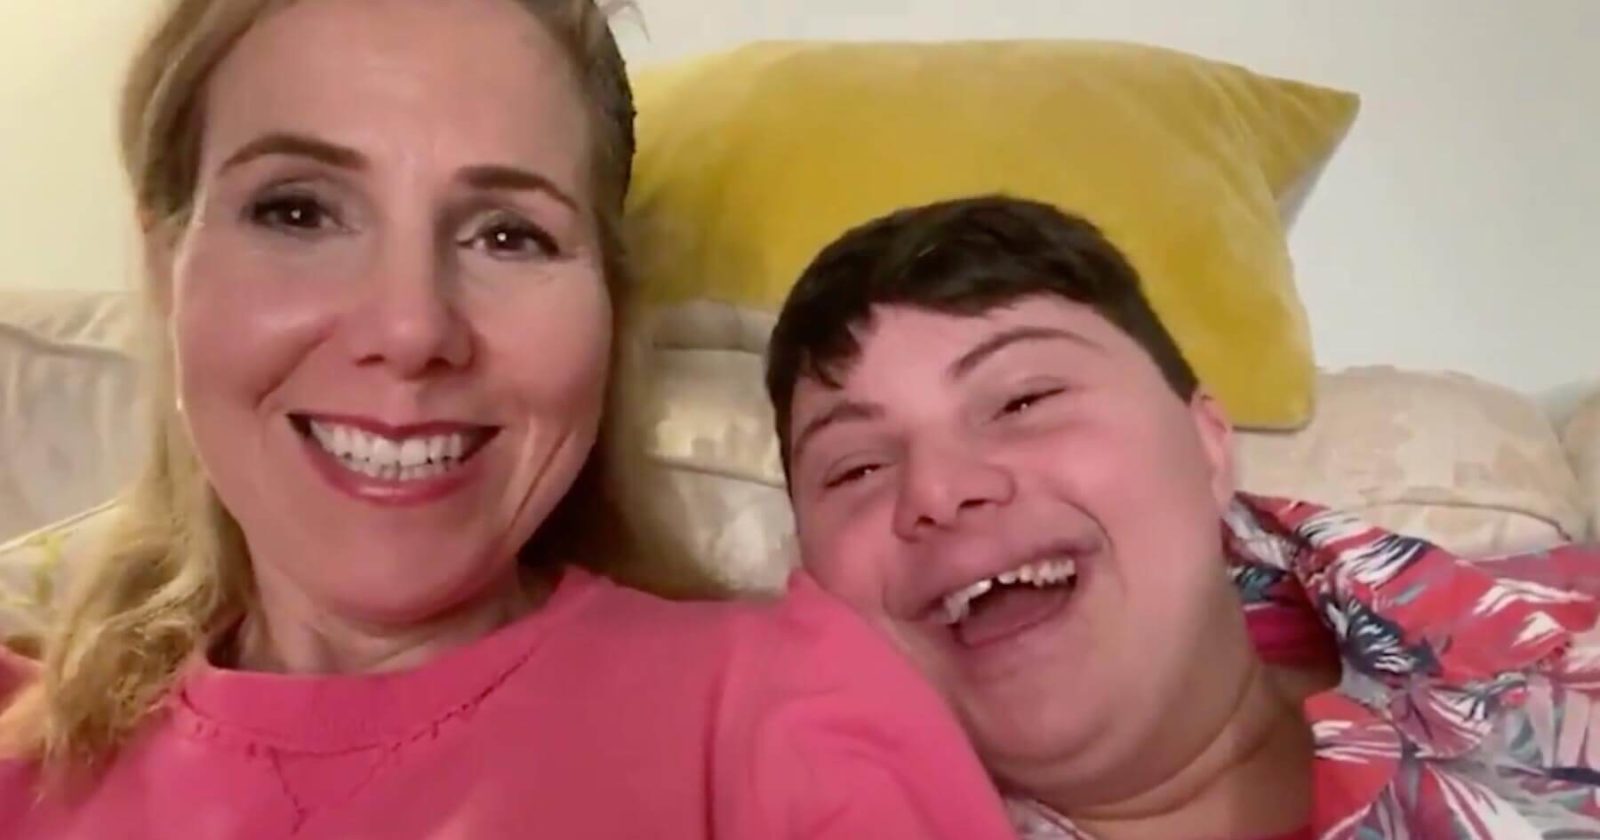 Actress Sally Phillips accuses Emmerdale of being ‘irresponsible’ after Down’s syndrome abortion plotline